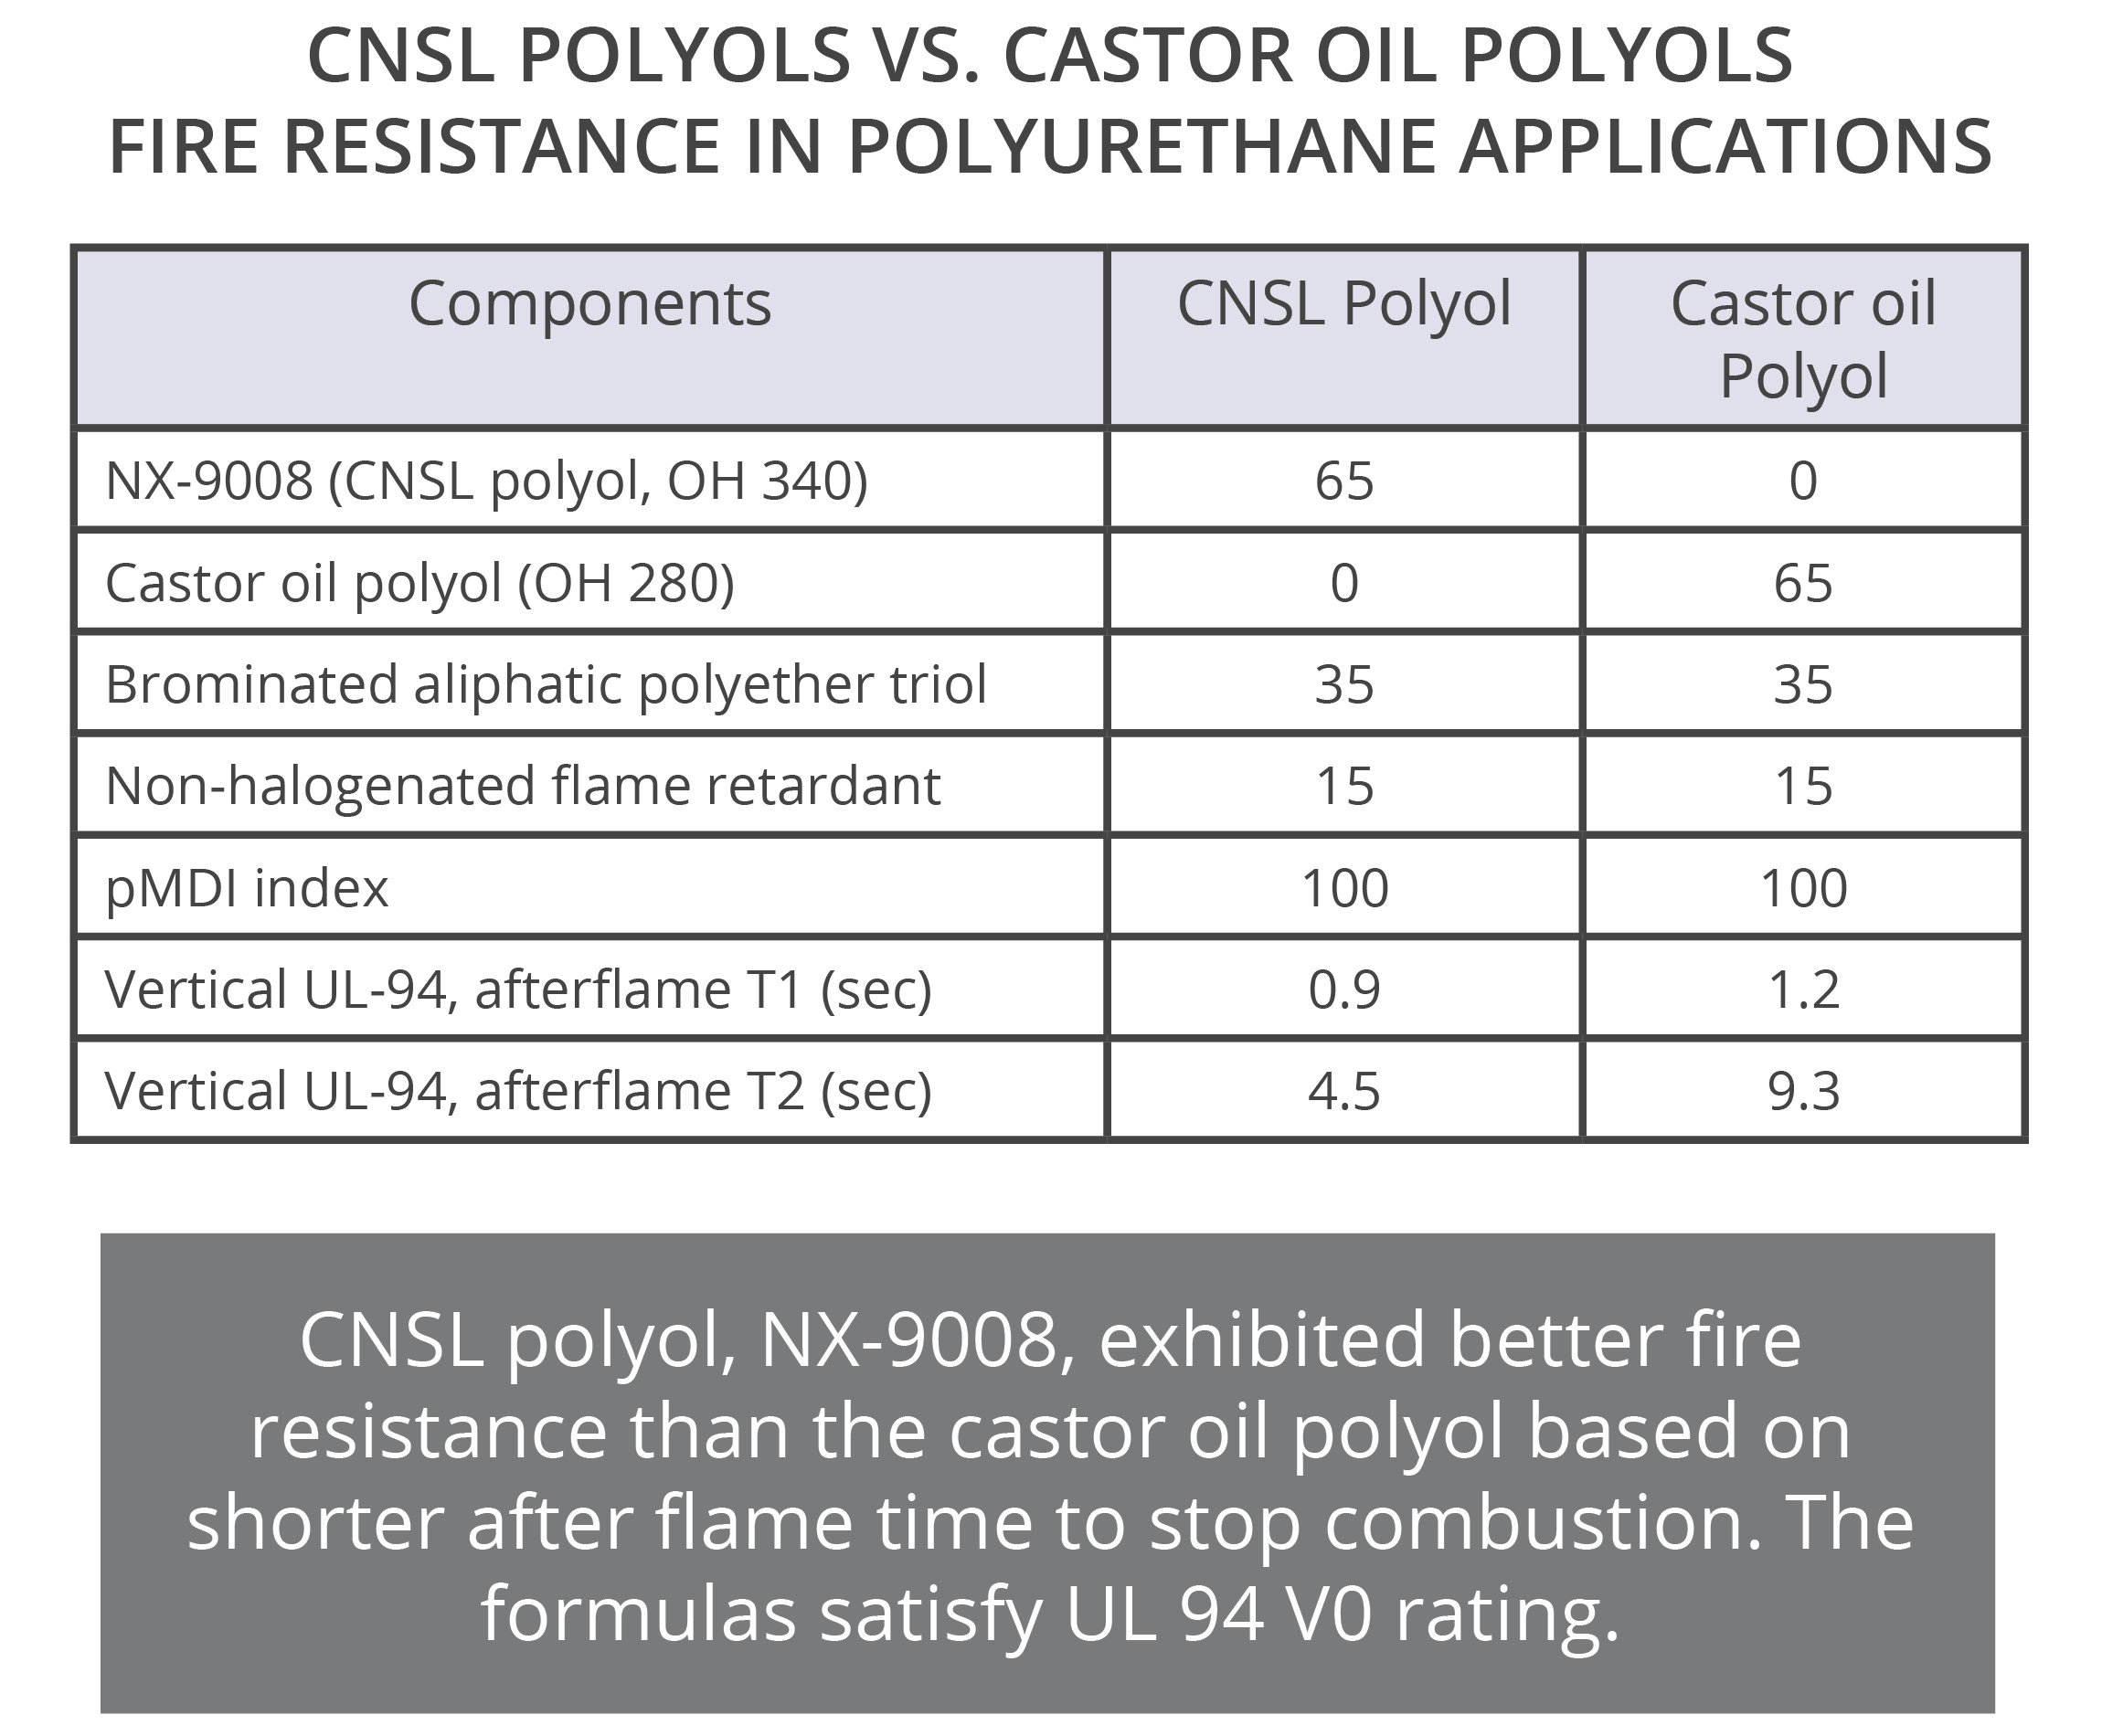 CNSL polyols are renewable and aromatic providing better fire resistance than other natural oil polyols